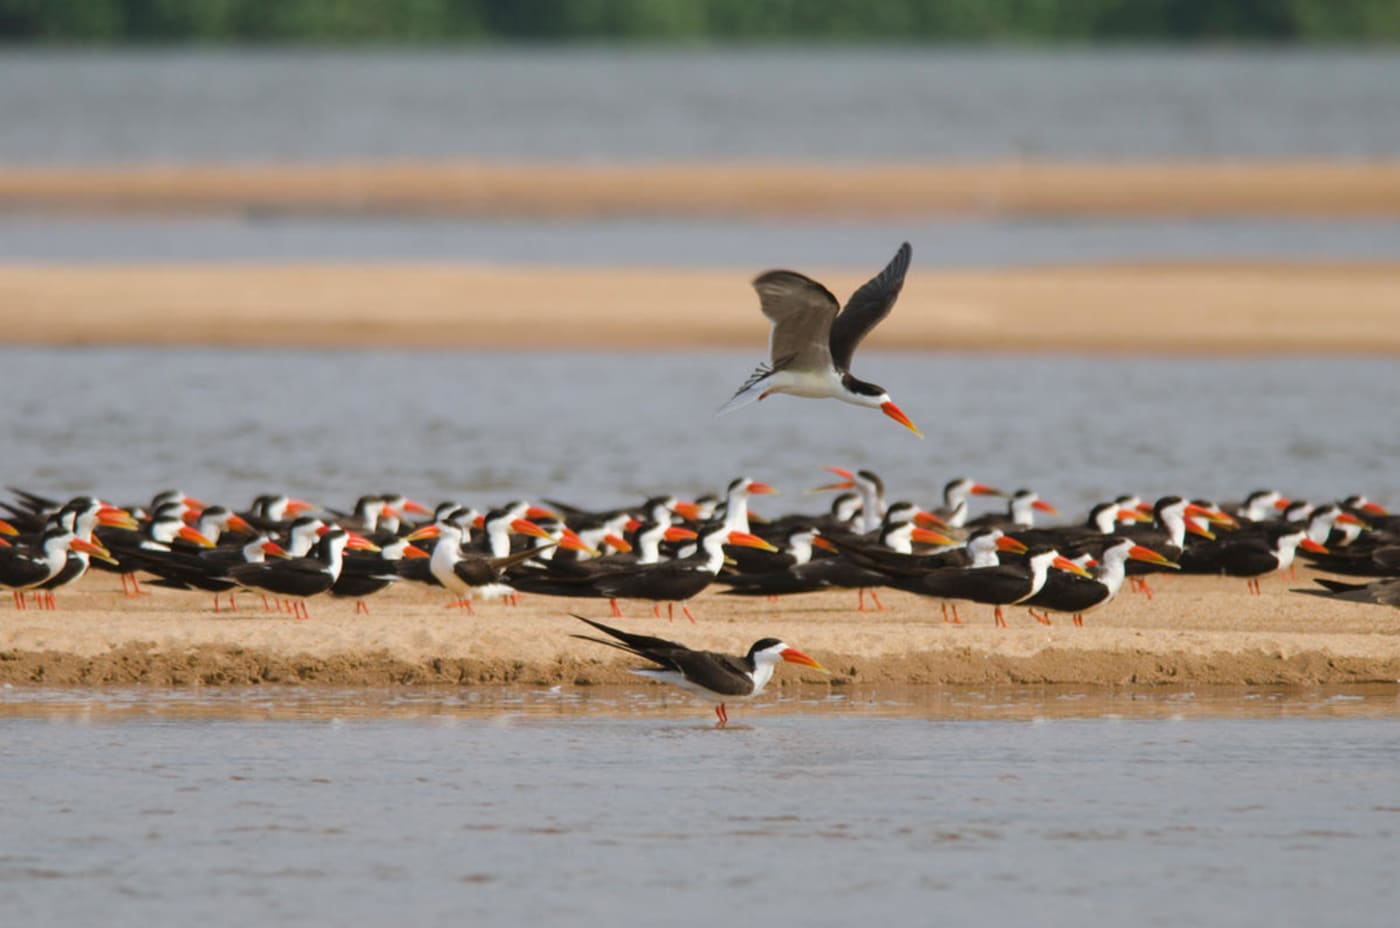 A group of African skimmers (Rynchops flavirostris) gather on a sand bank near the Cameroon coast. They are medium-sized birds with a black upper body and top of their head, with a white underside. They have short, bright red legs, a very large red and yellow beak and long pointy tail feathers.